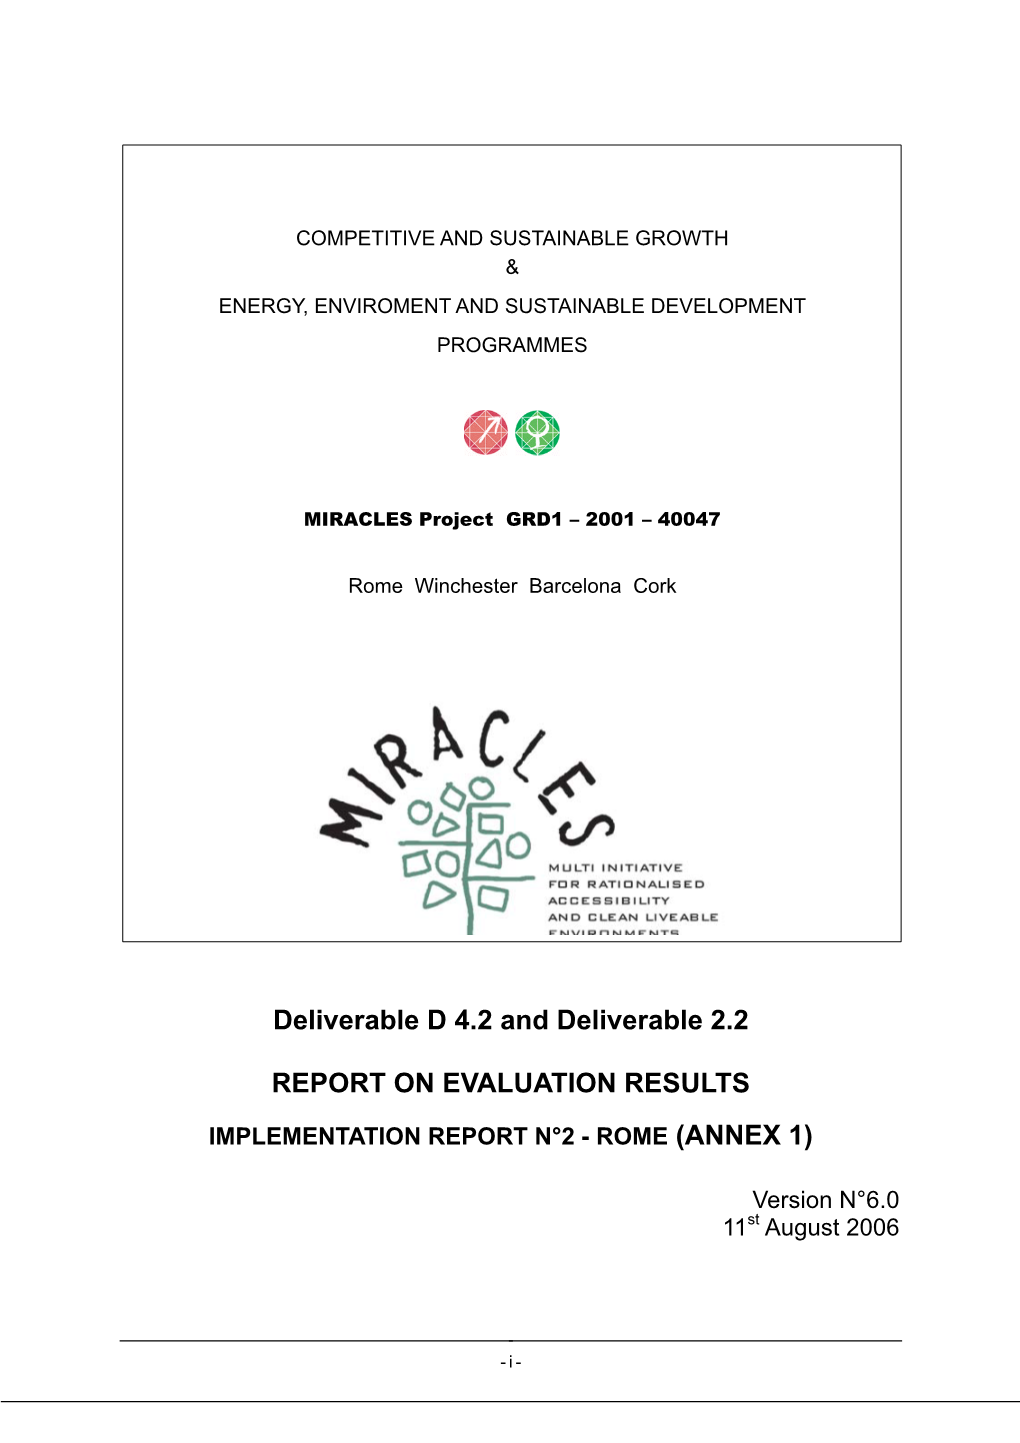 Deliverable D 4.2 and Deliverable 2.2 REPORT on EVALUATION RESULTS